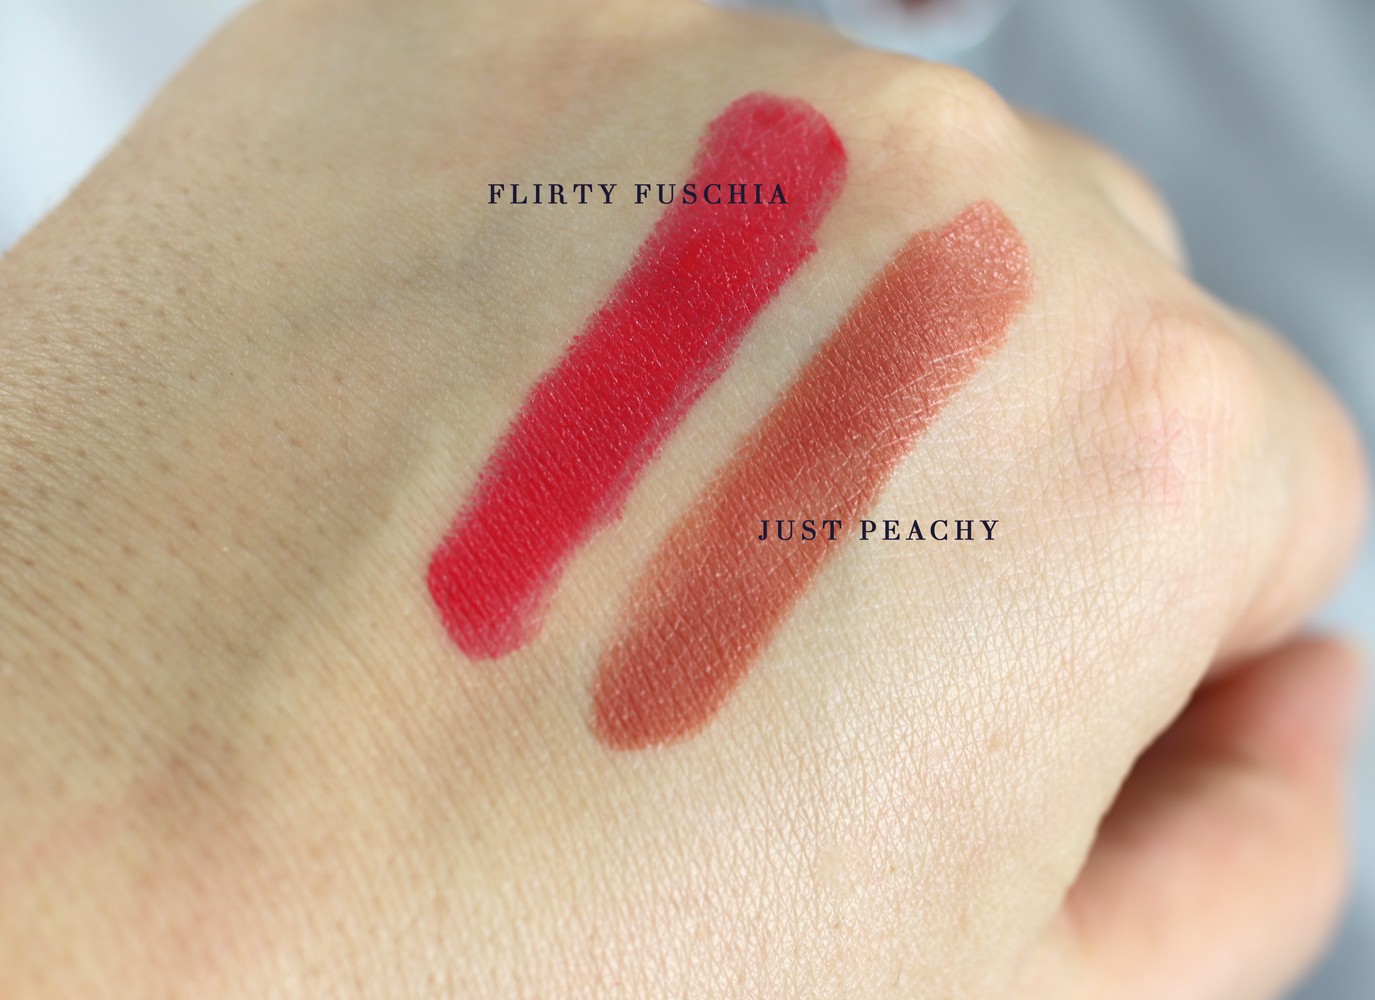 Luscious Cosmetics Super Moisturizing Lipstick - Luscious Cosmetics Review and Try On by popular LA cruelty free beauty blogger My Beauty Bunny